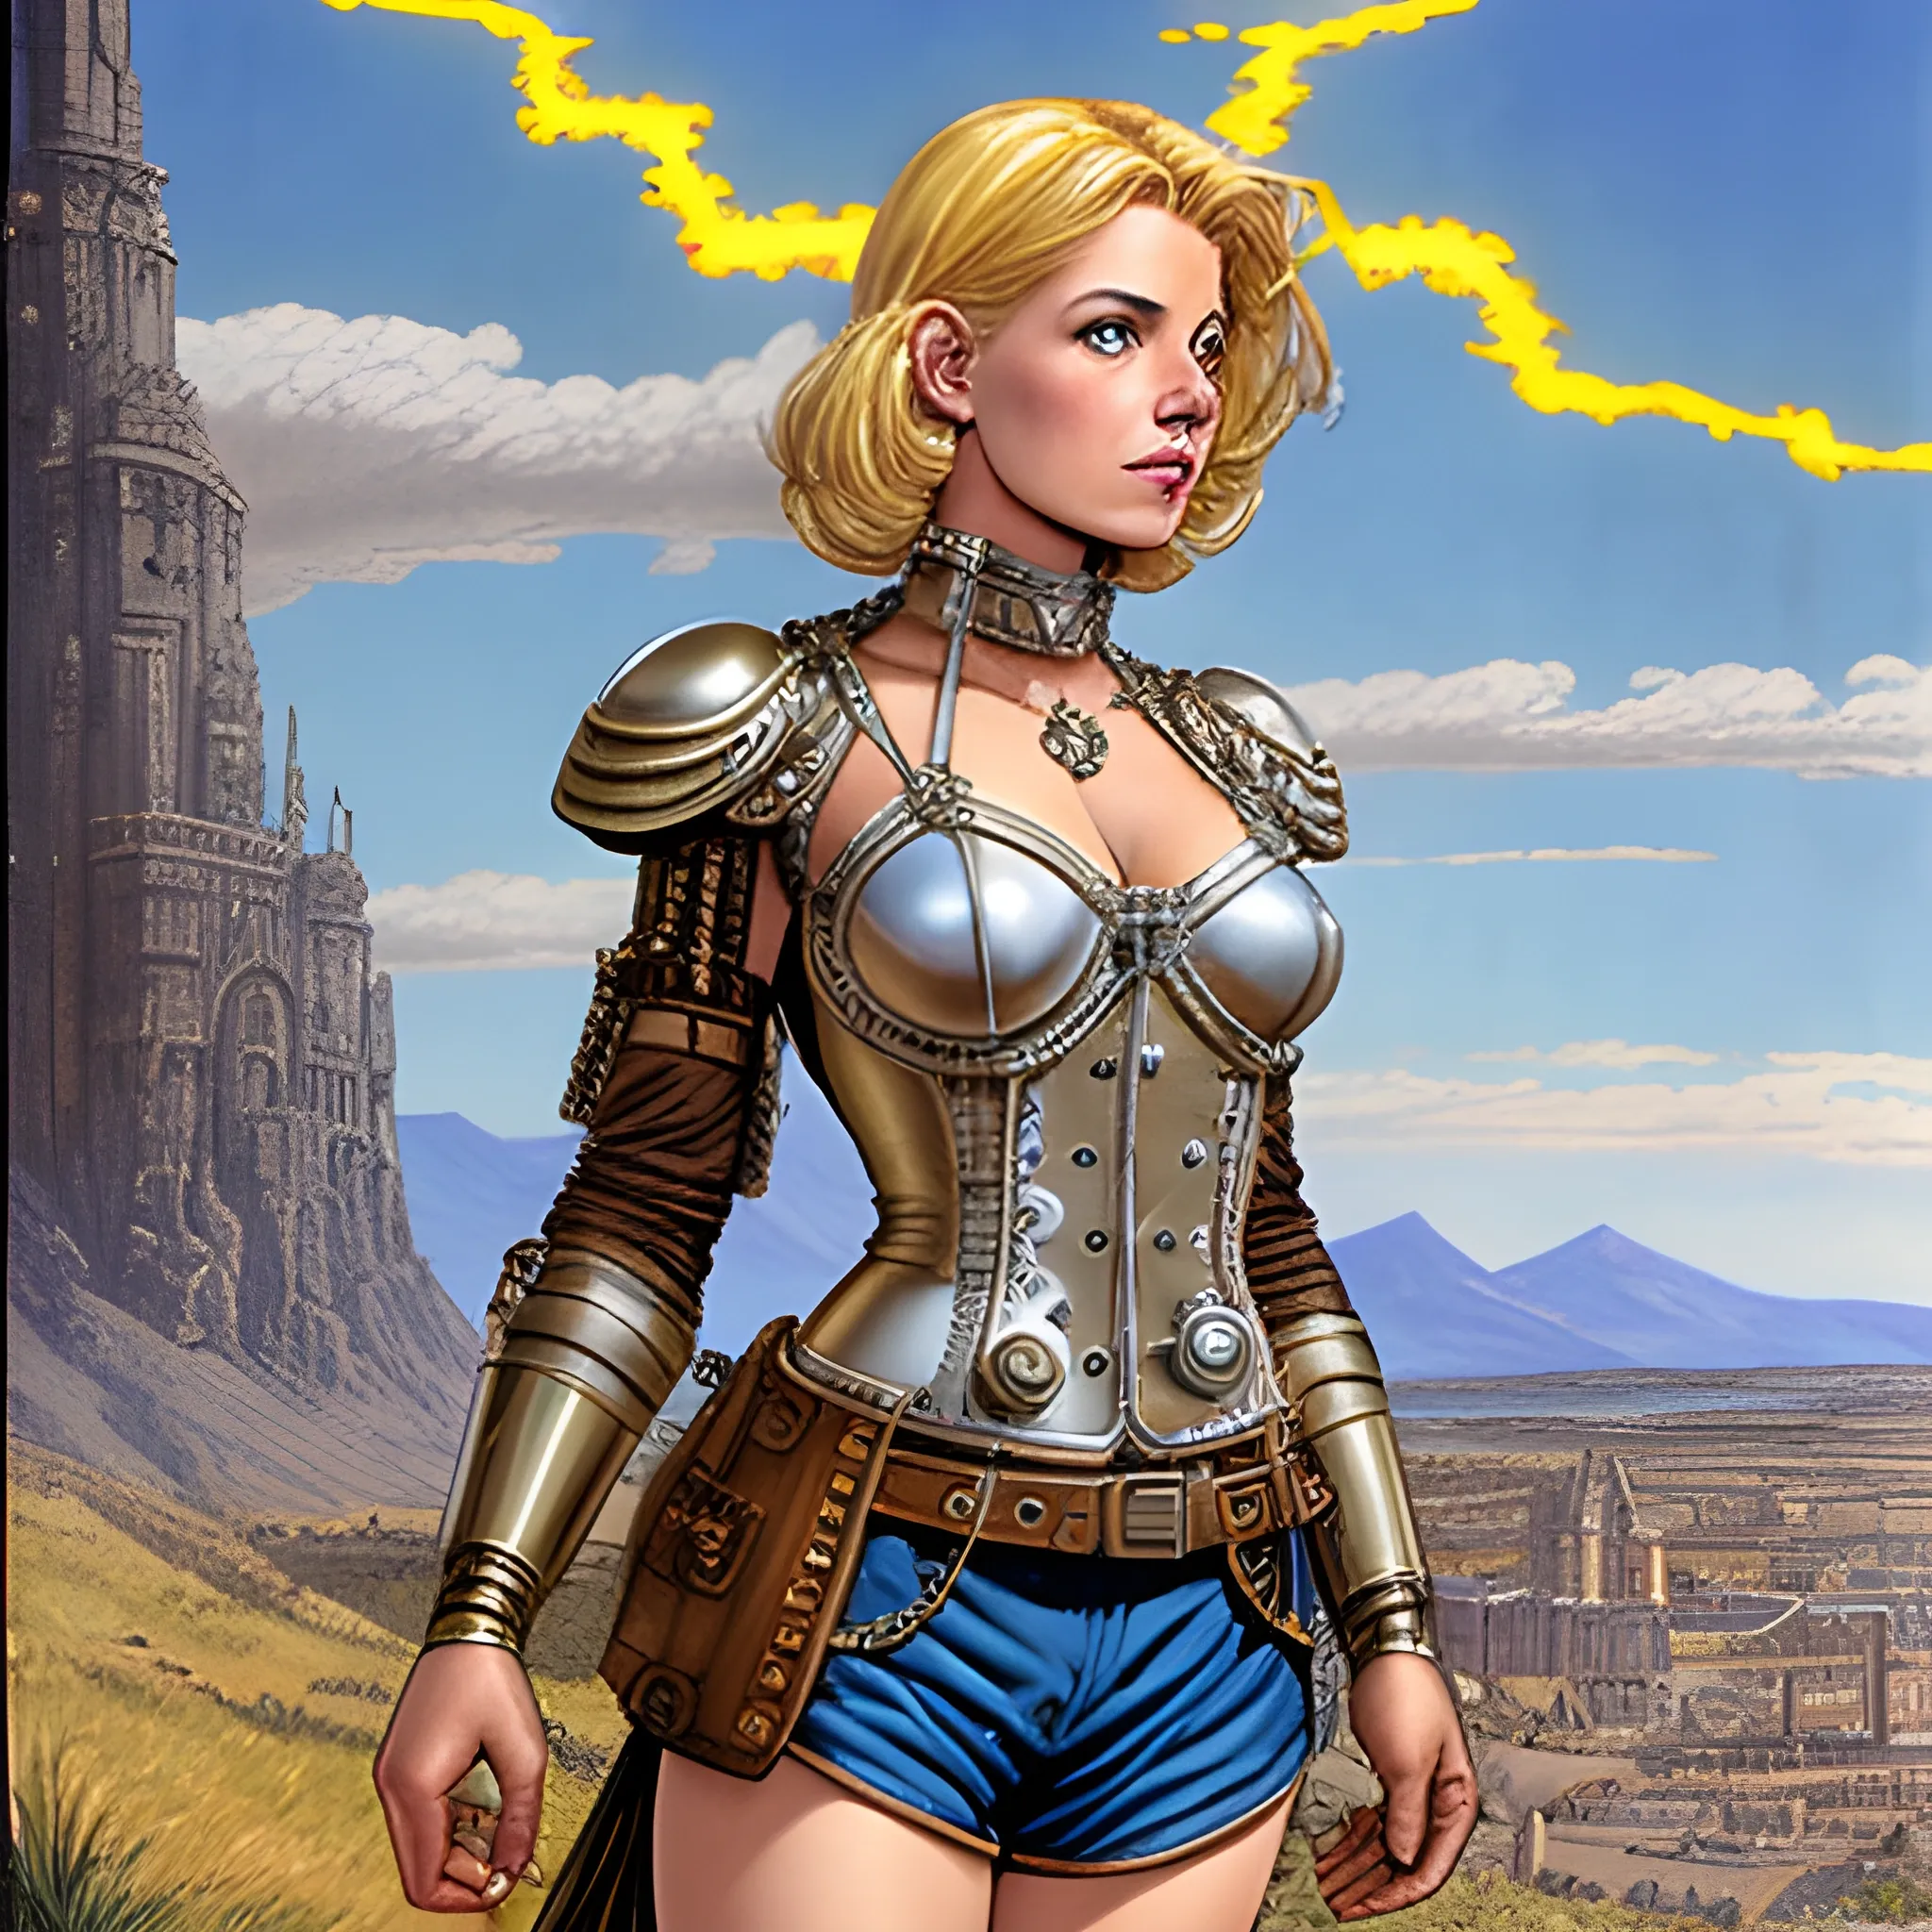 character concept art of a steampunk woman engineer | | blonde, by steve hanks, tan shorts, mount ararat very far away in the background, medieval poster, intricate upper body, lightning fantasy magic, illustration by al williamson